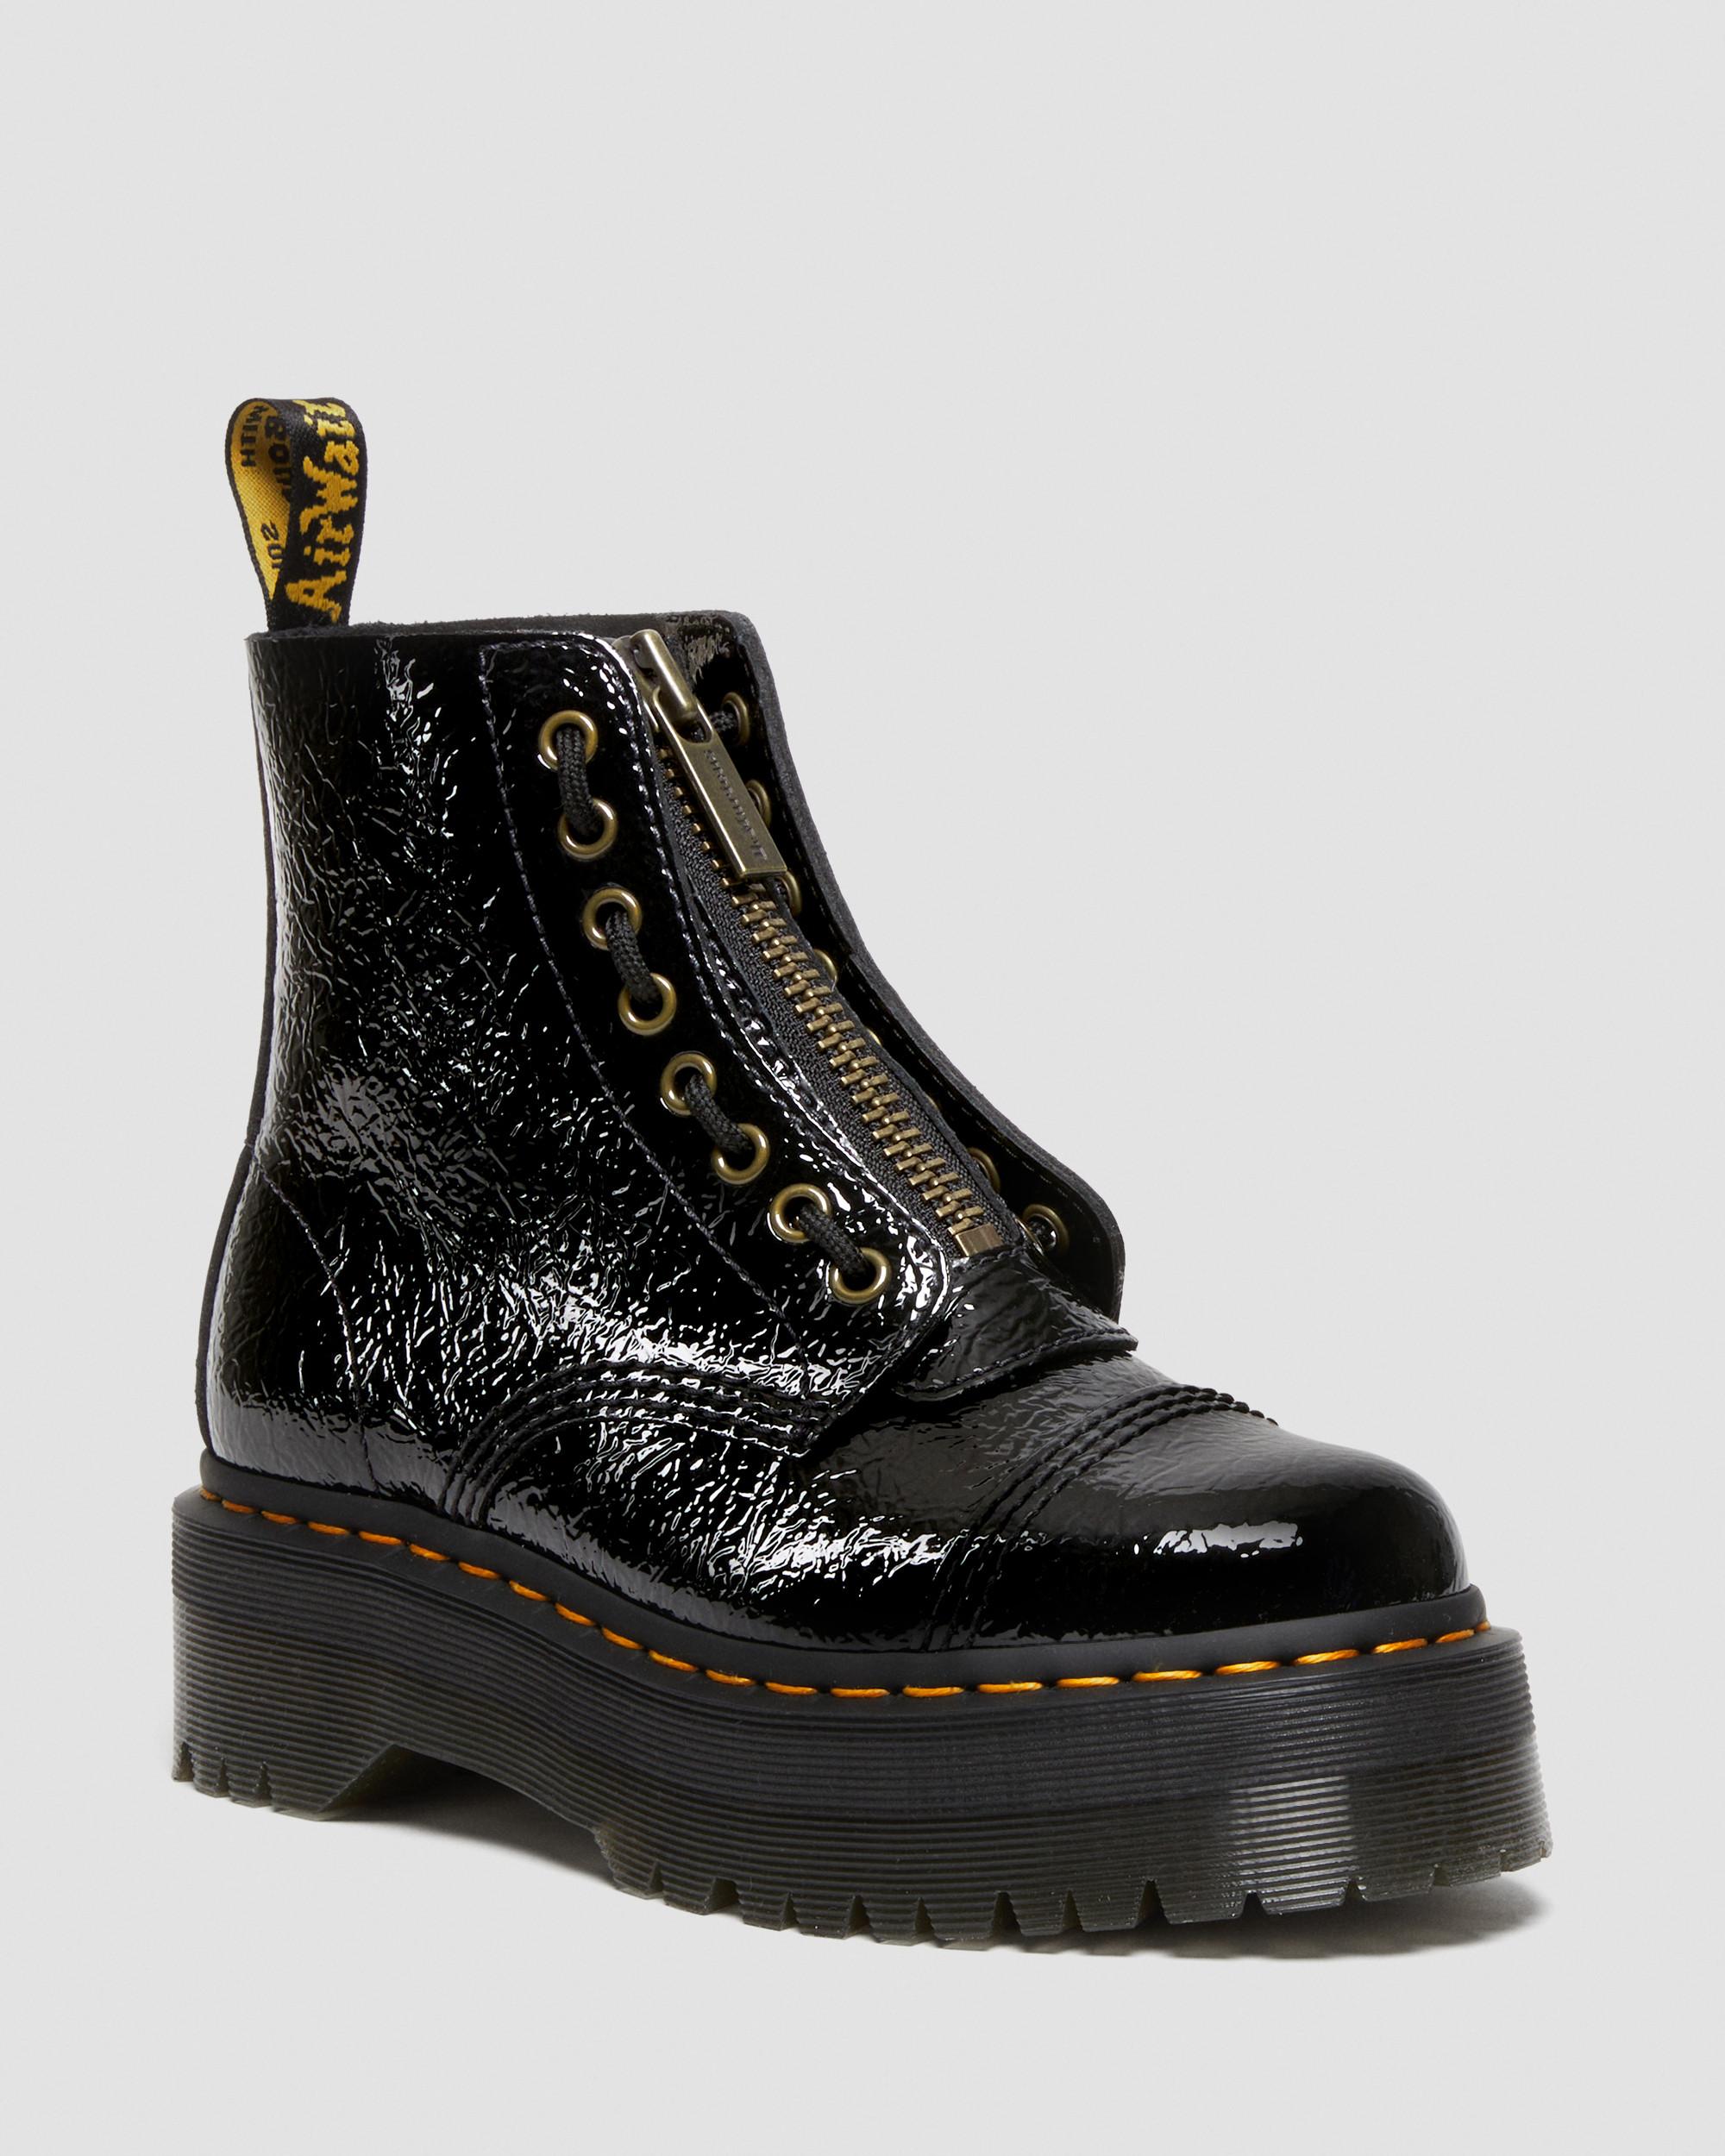 Sinclair Distressed Patent Leather Platform Boots in Black | Dr. Martens